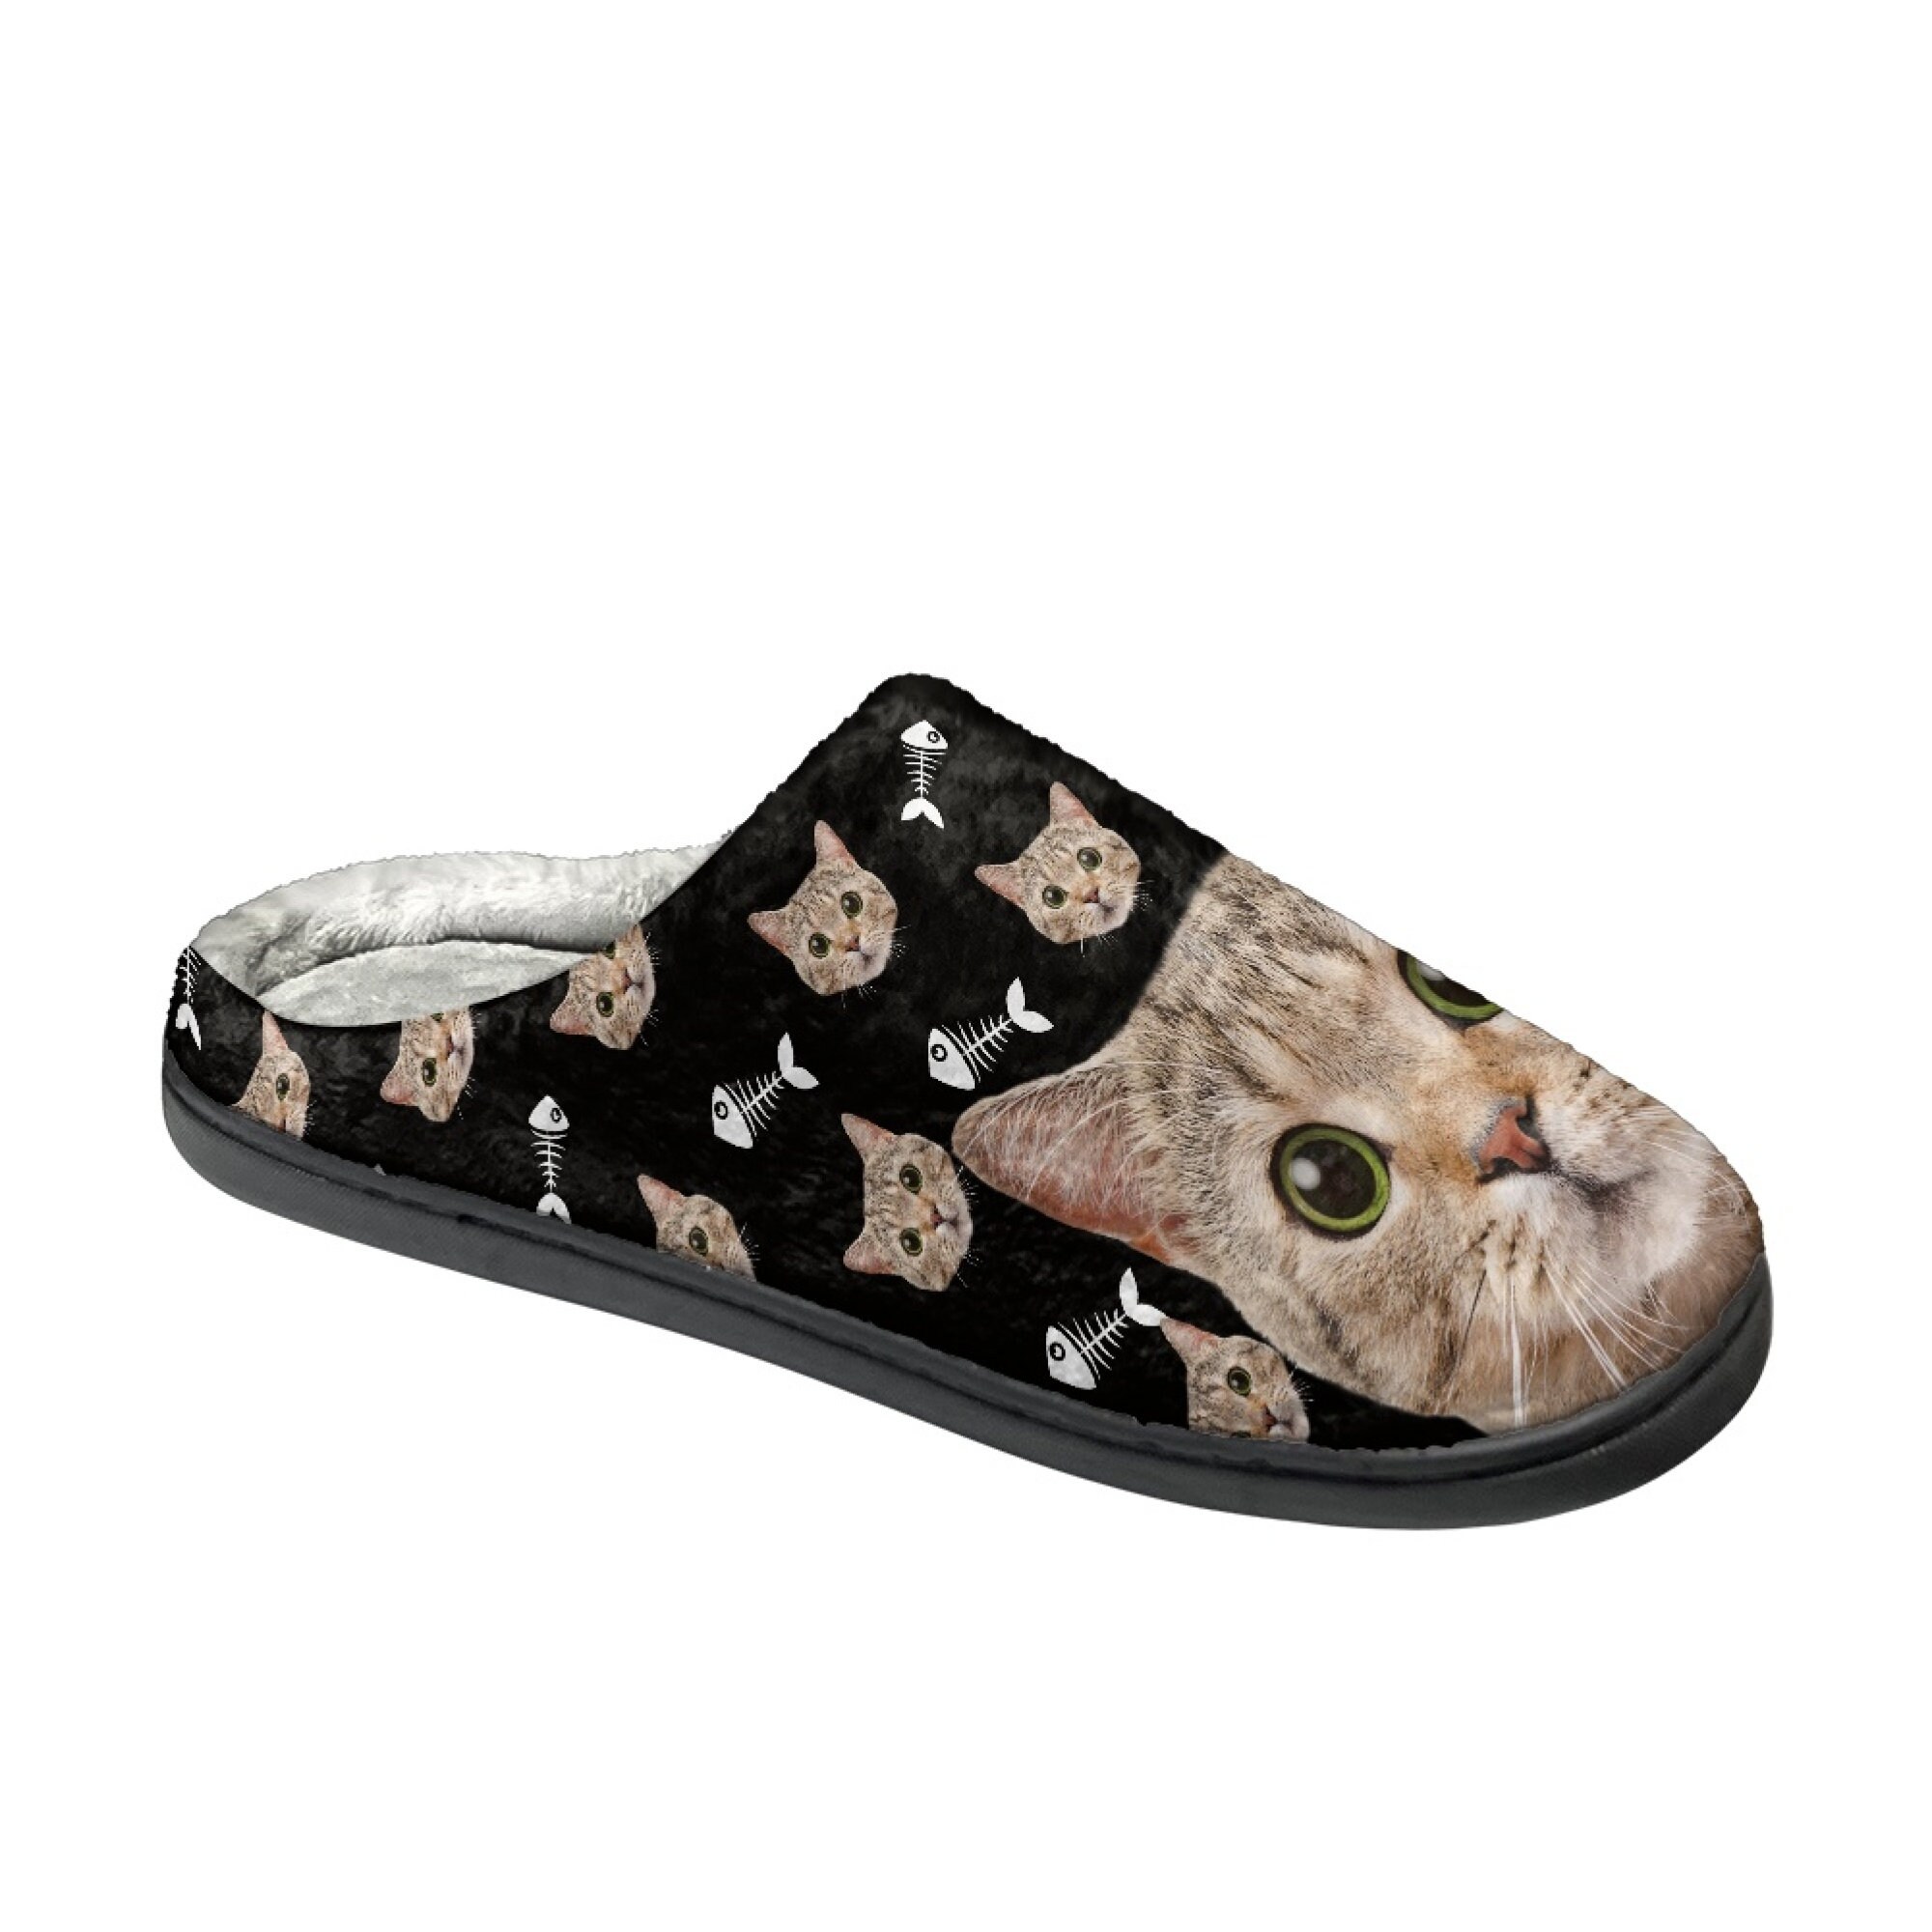 Black Cat Slippers With Paw, Cat Lover Gift Ideas, Kitty Mom And Dad Gift  sold by Idalina Unwrapped, SKU 55409234